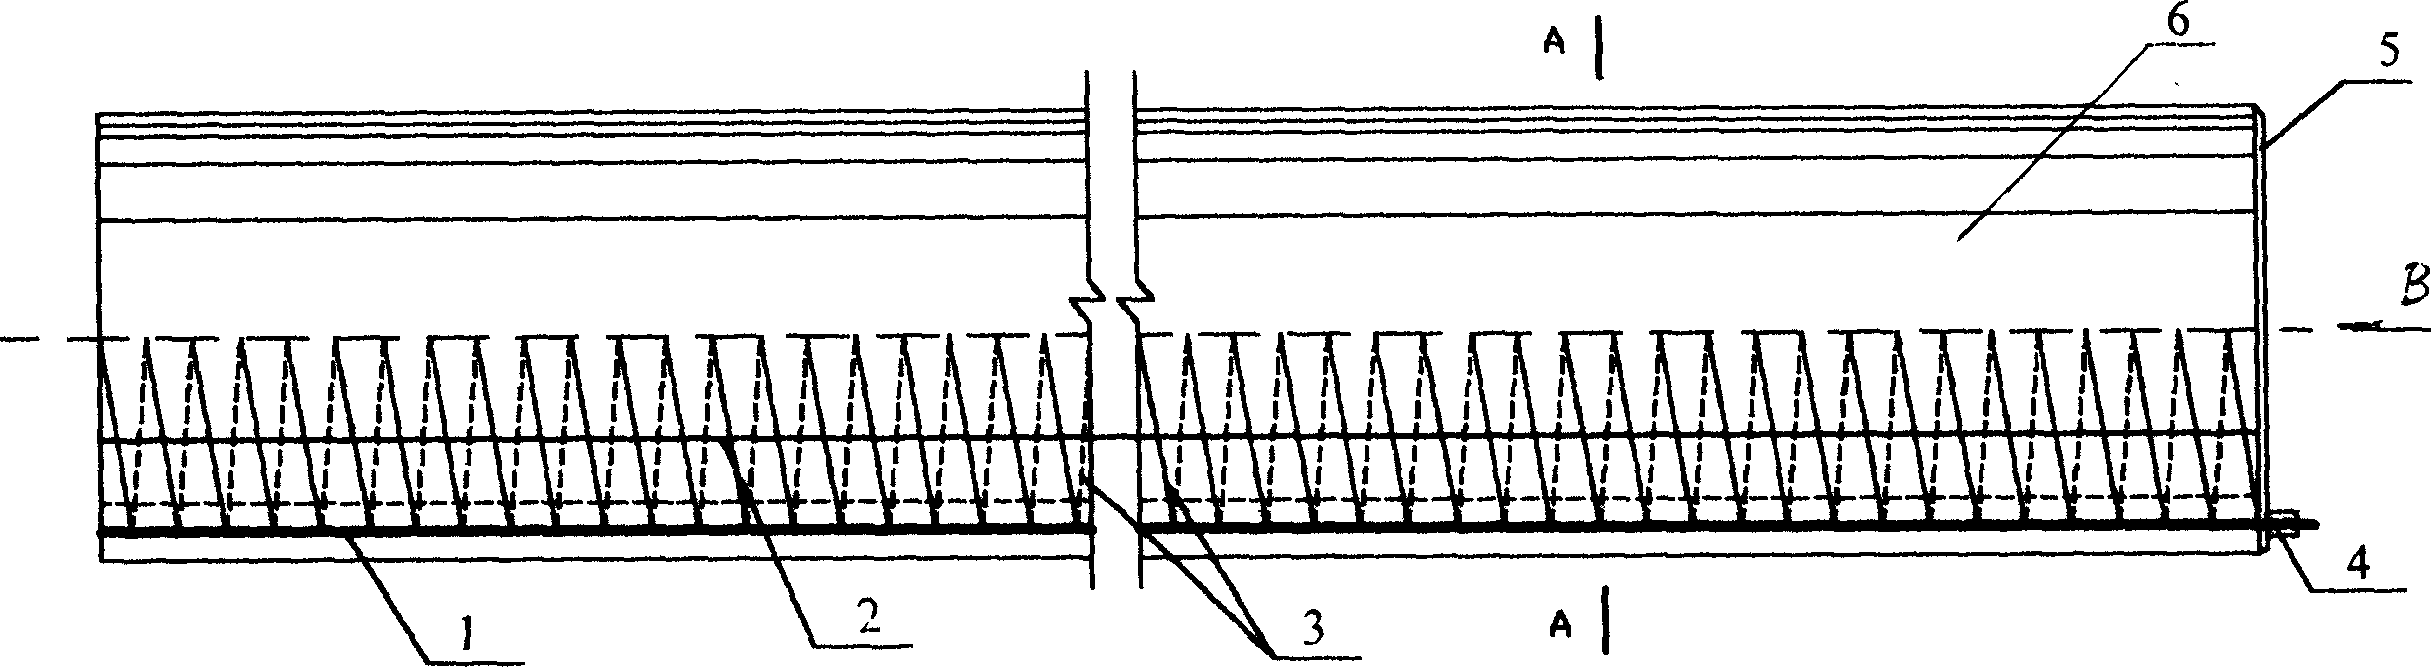 Prestressed concrete pipe pile with pretensioning type strands